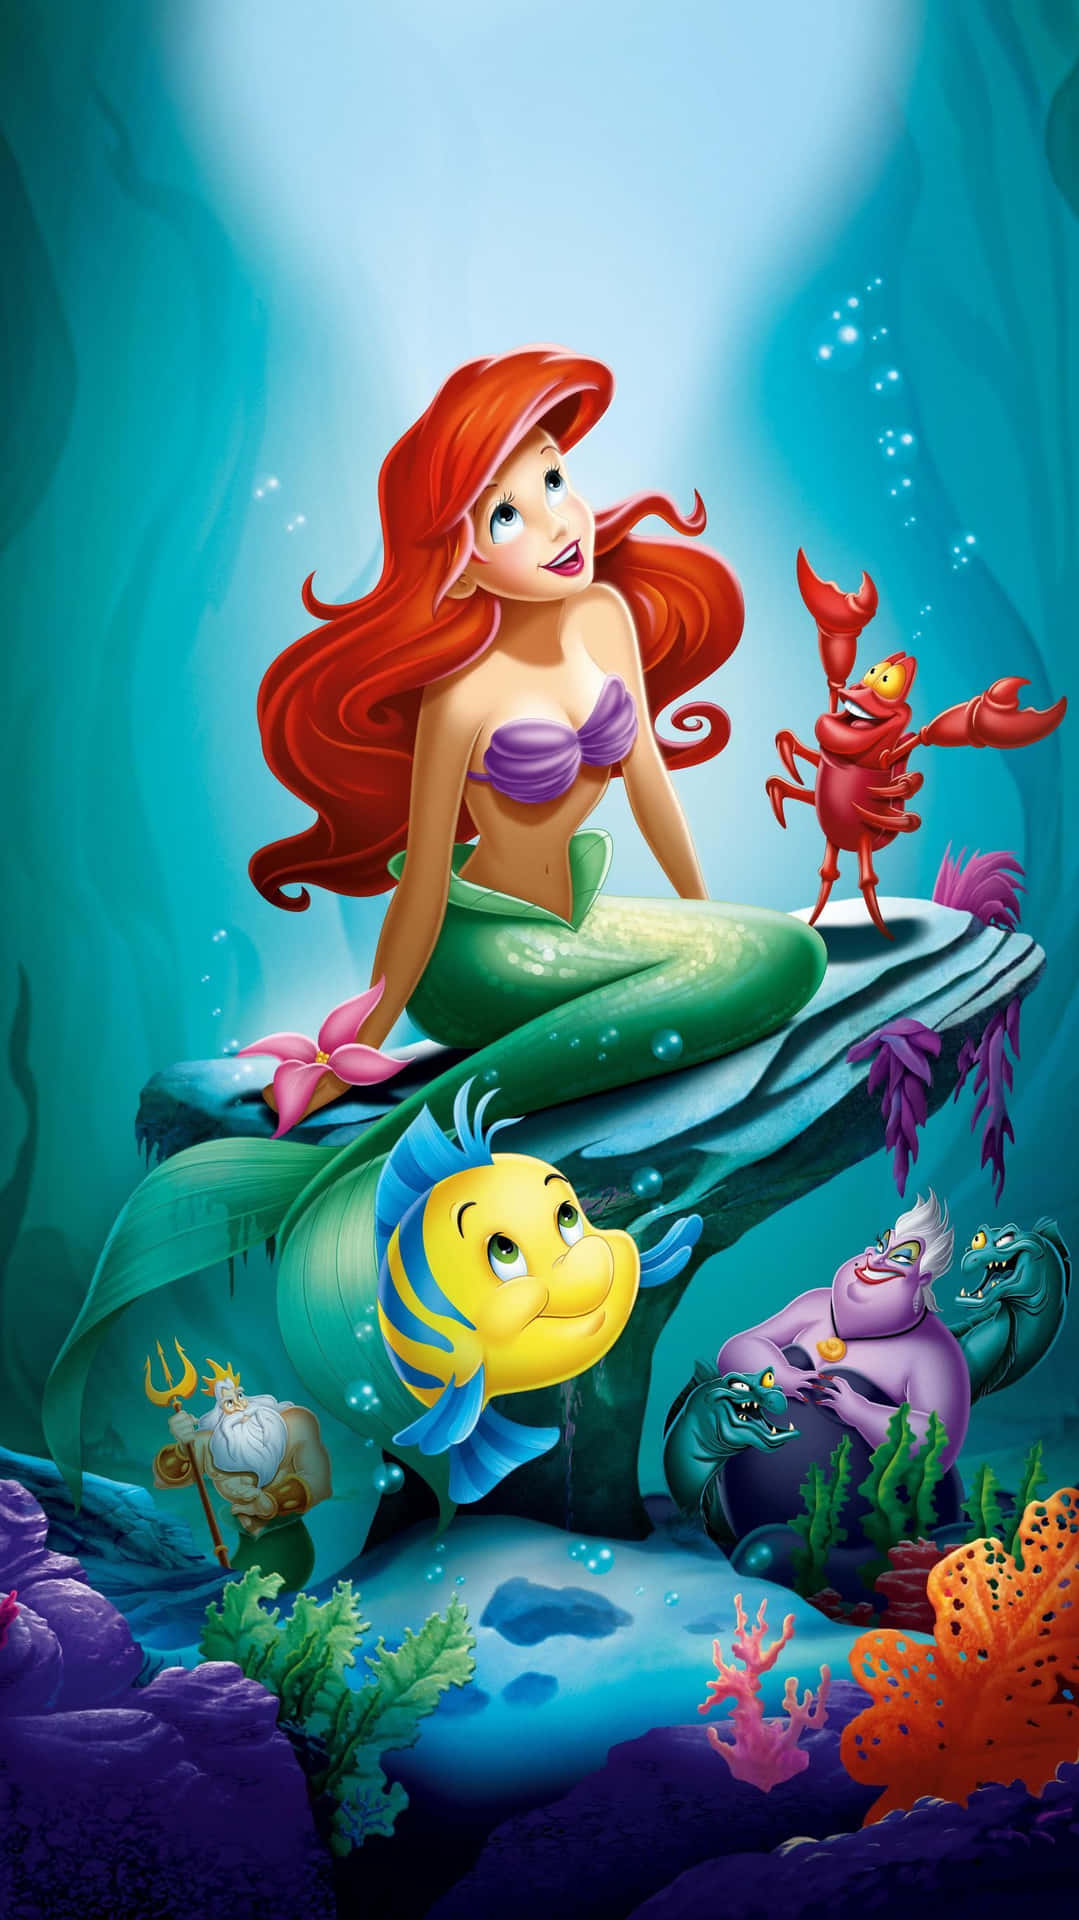 Magical Underwater World - The Little Mermaid Background